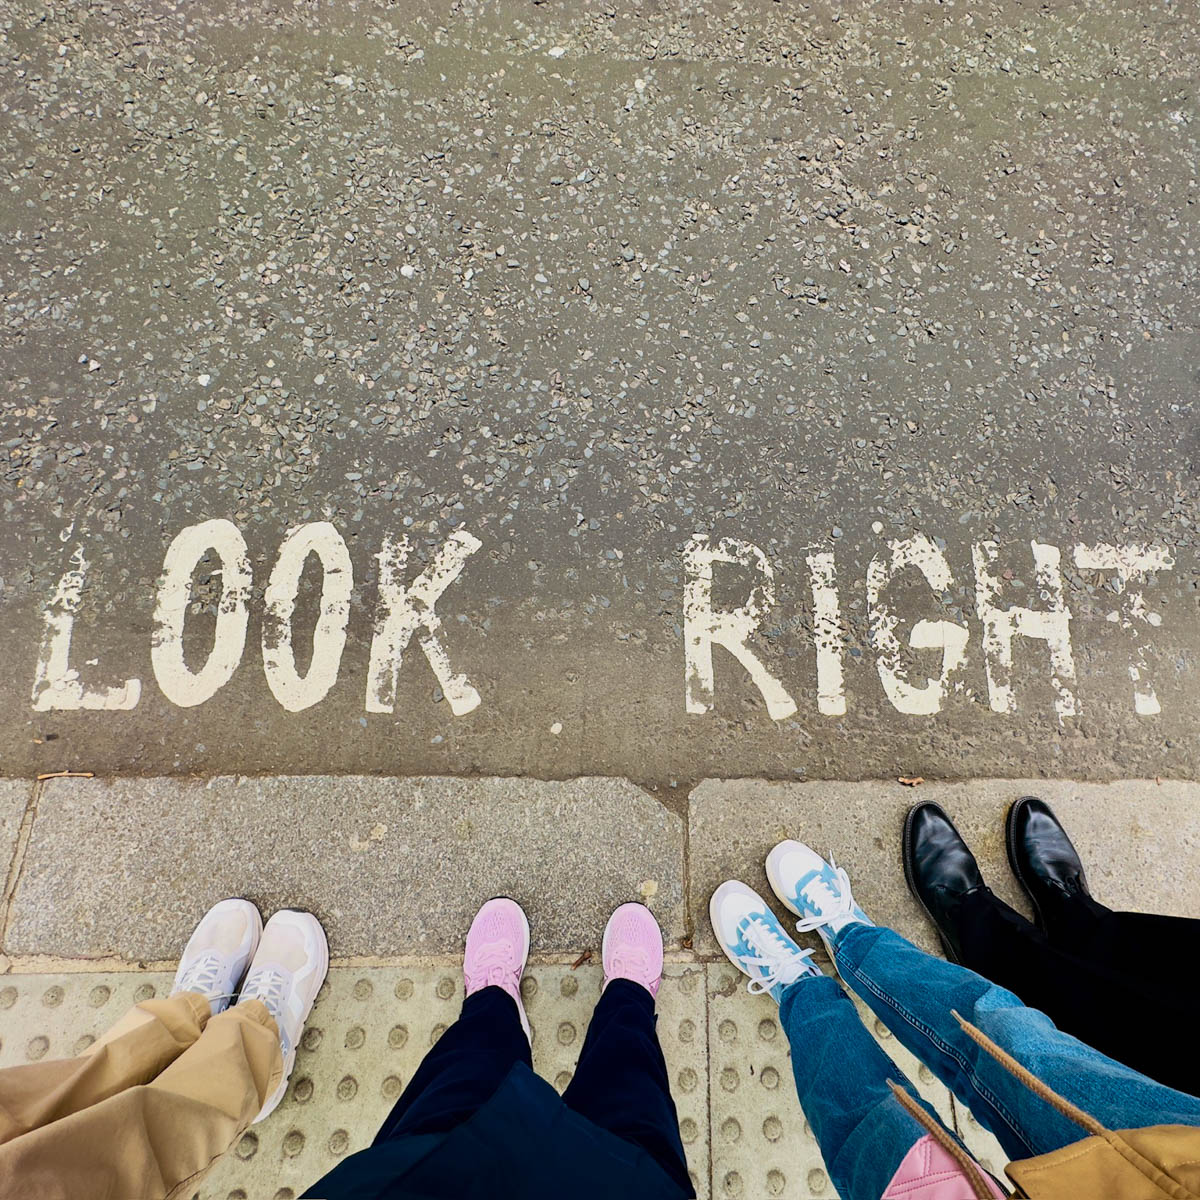 The street has been painted with the message "Look Right". Four pairs of feet are lined up at the sidewalk ready to cross.